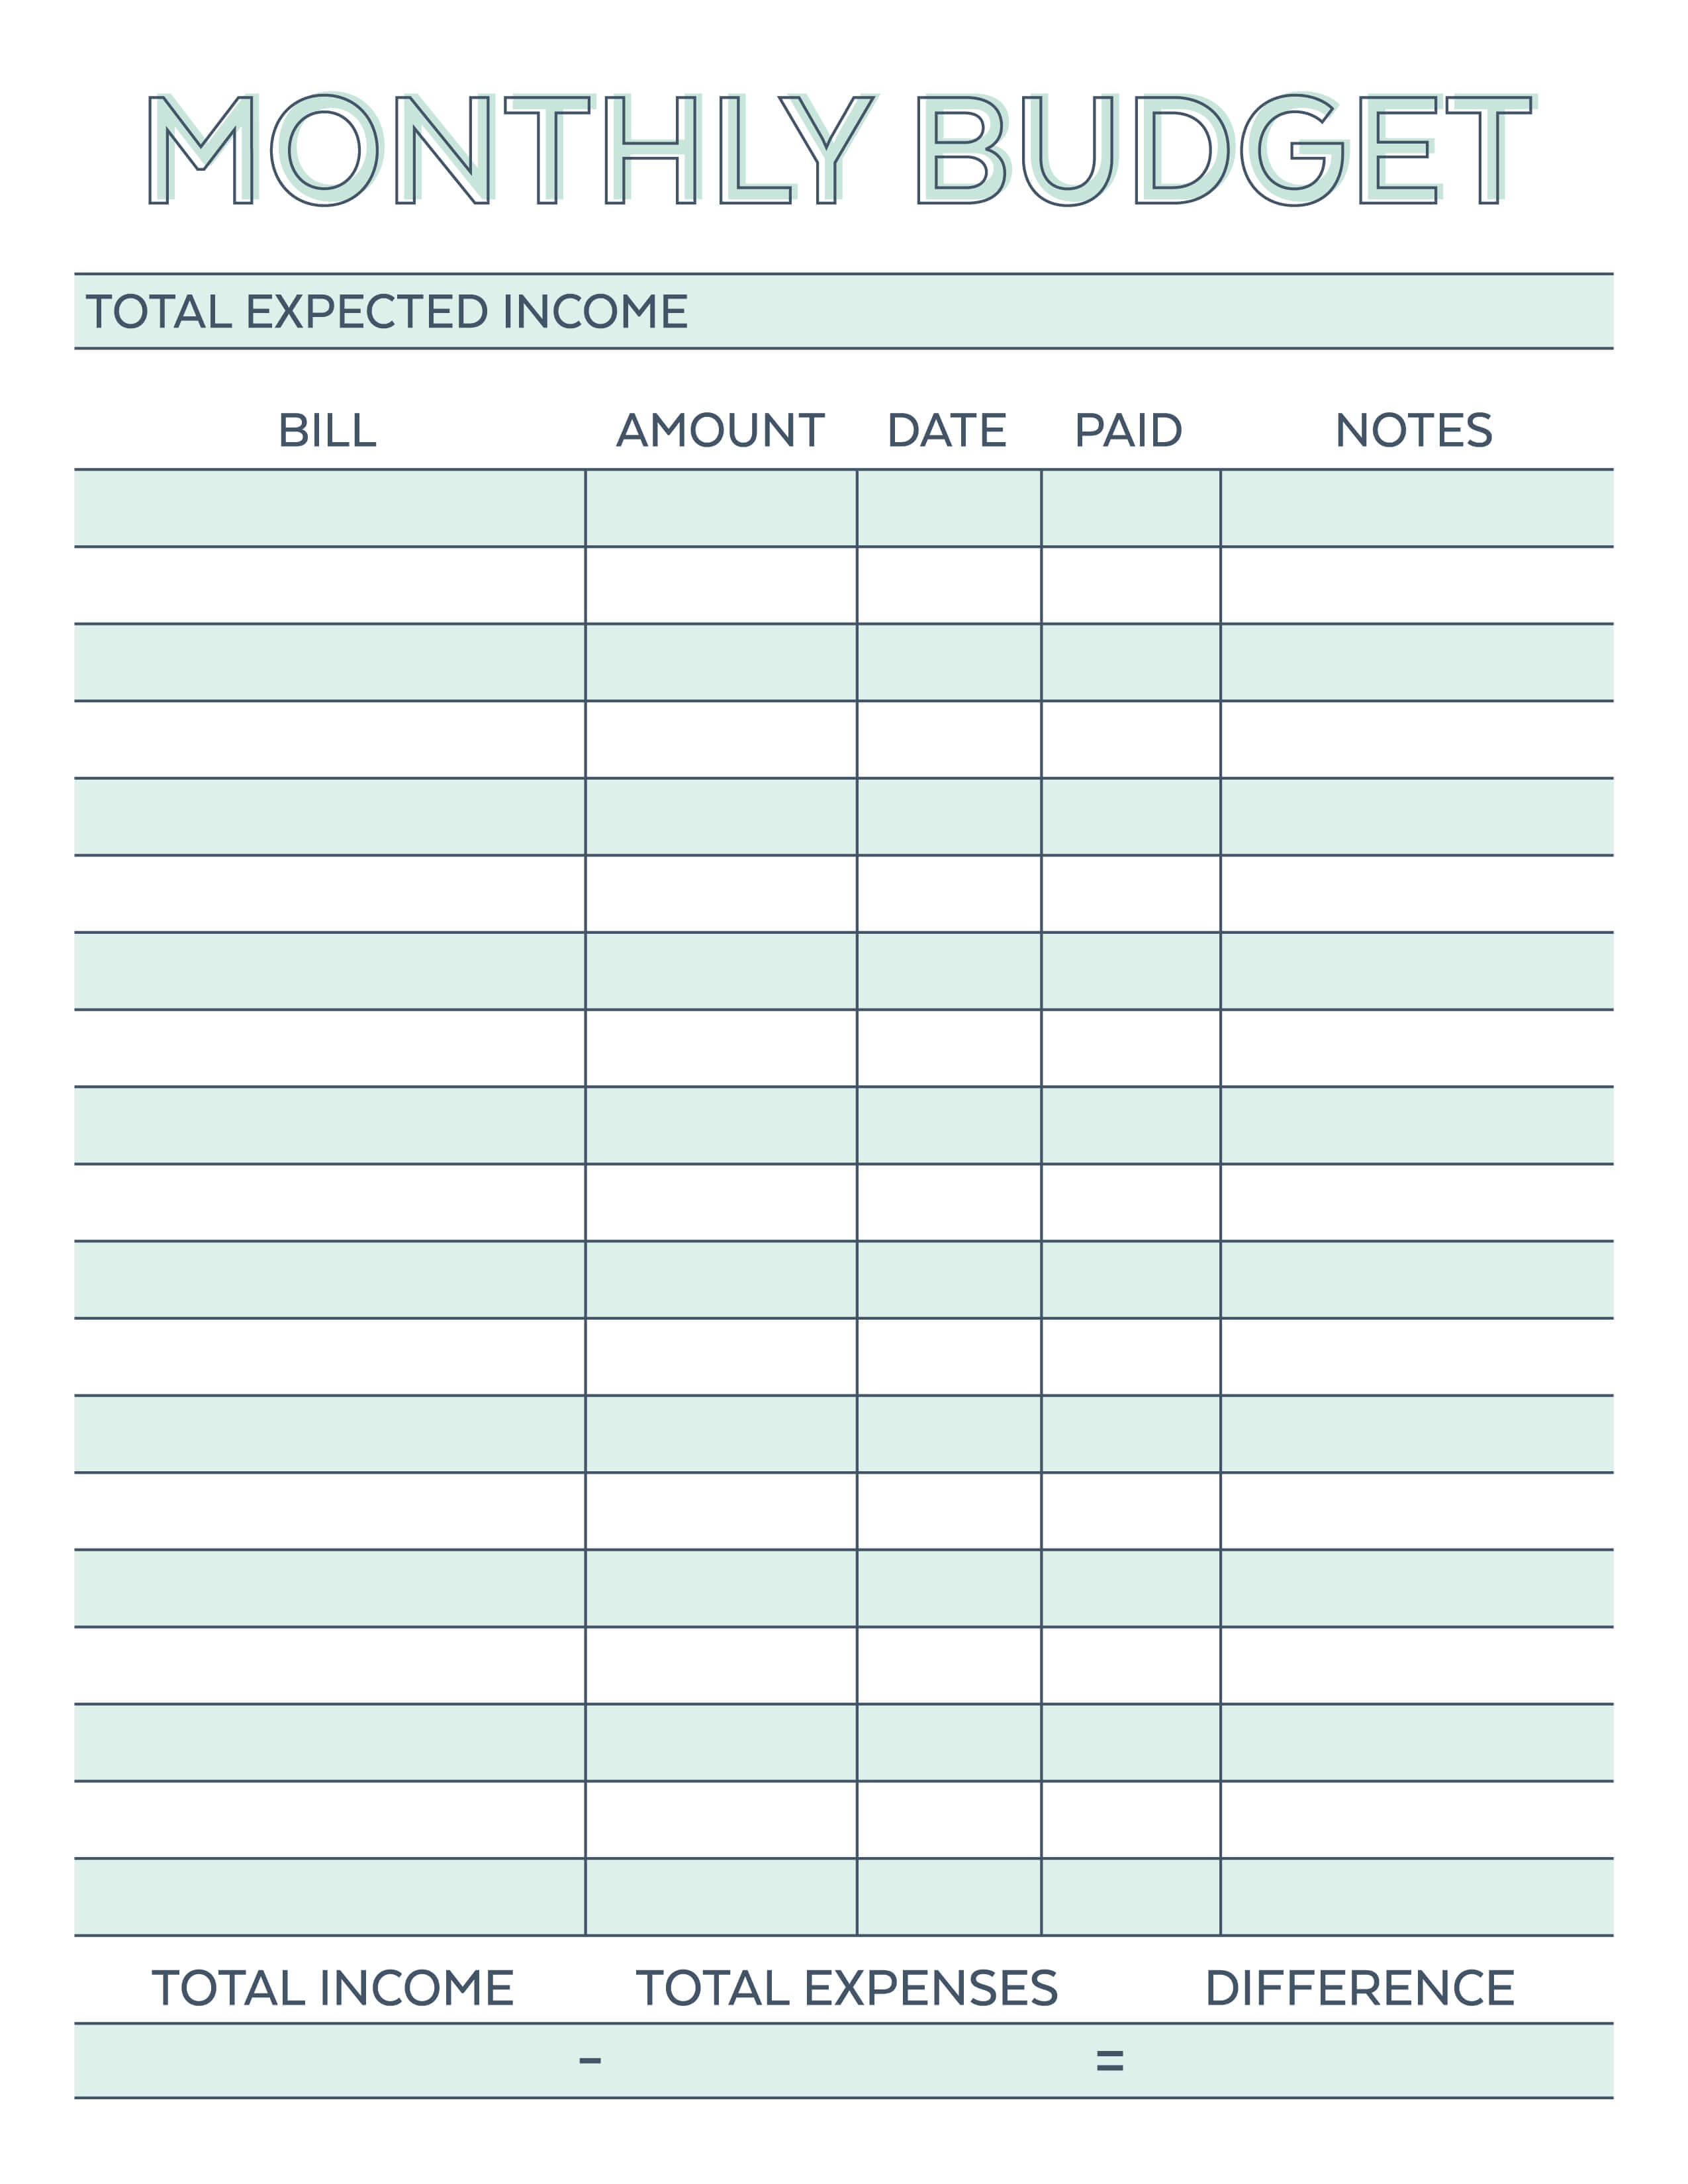 Monthly Budget Planner - Free Printable Budget Worksheet - Free Printable Monthly Budget Worksheets